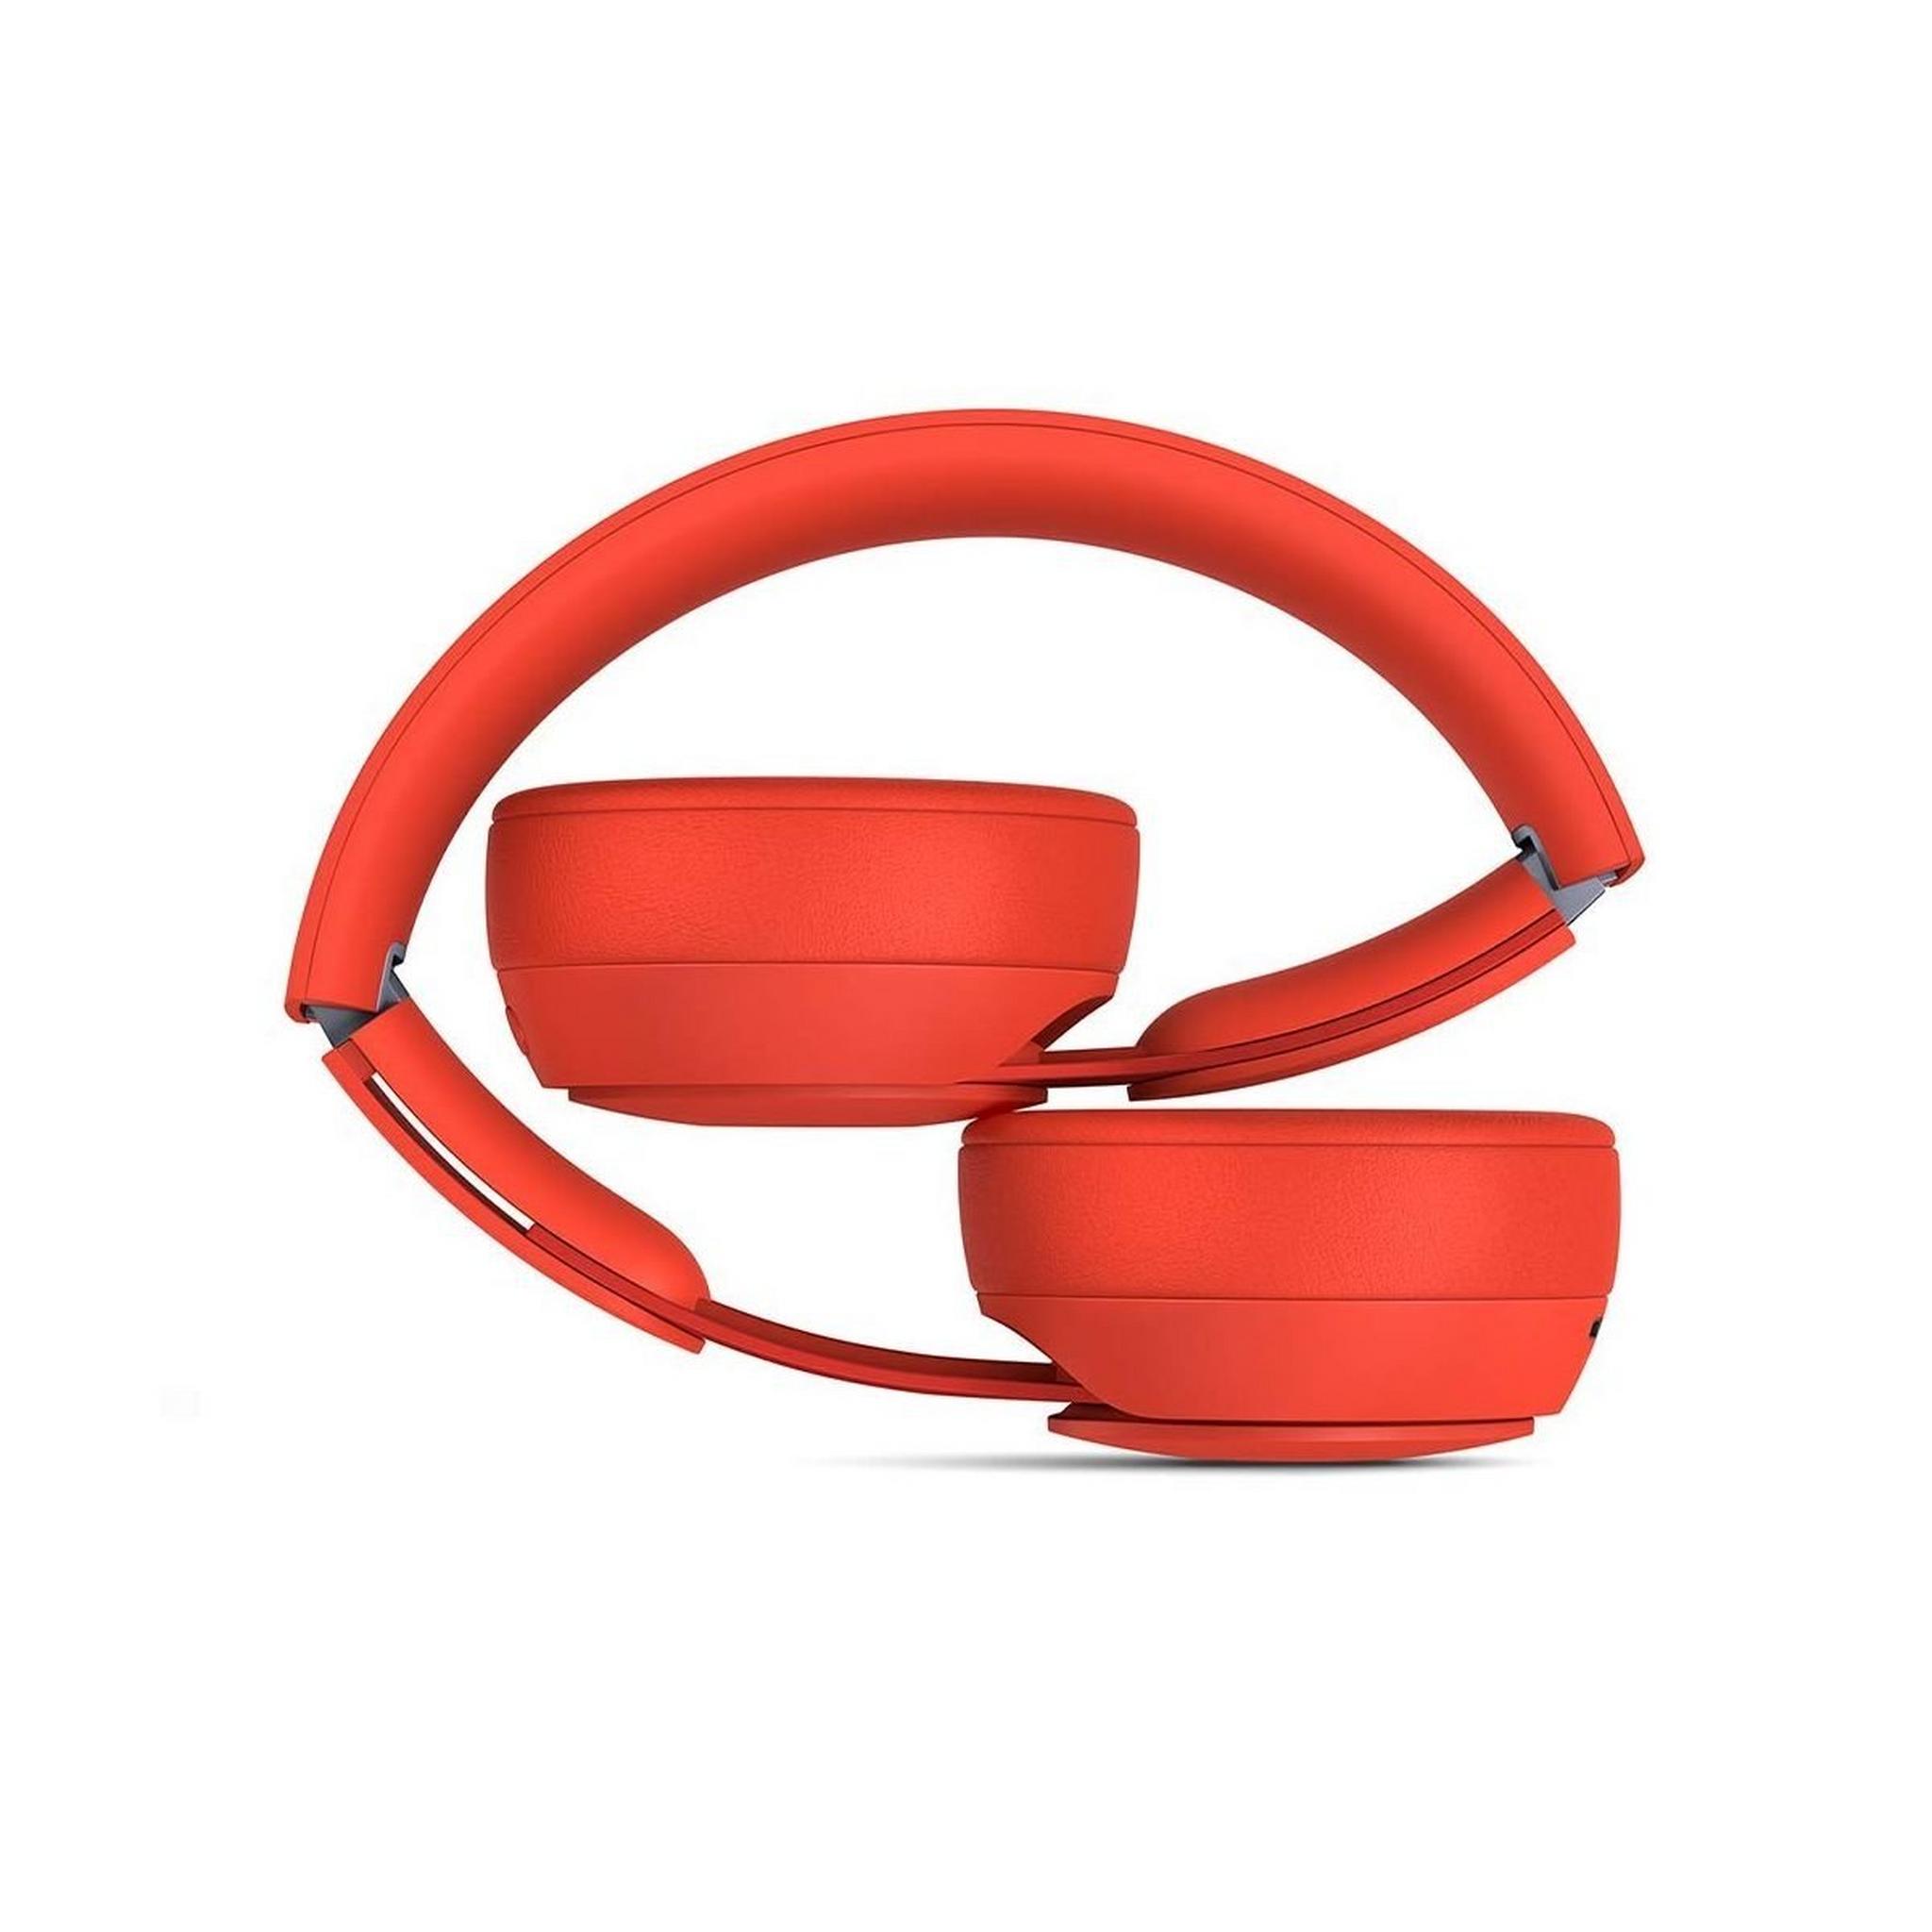 Beats by Dr. Dre Solo Pro Wireless Over-ear Headphone - Red